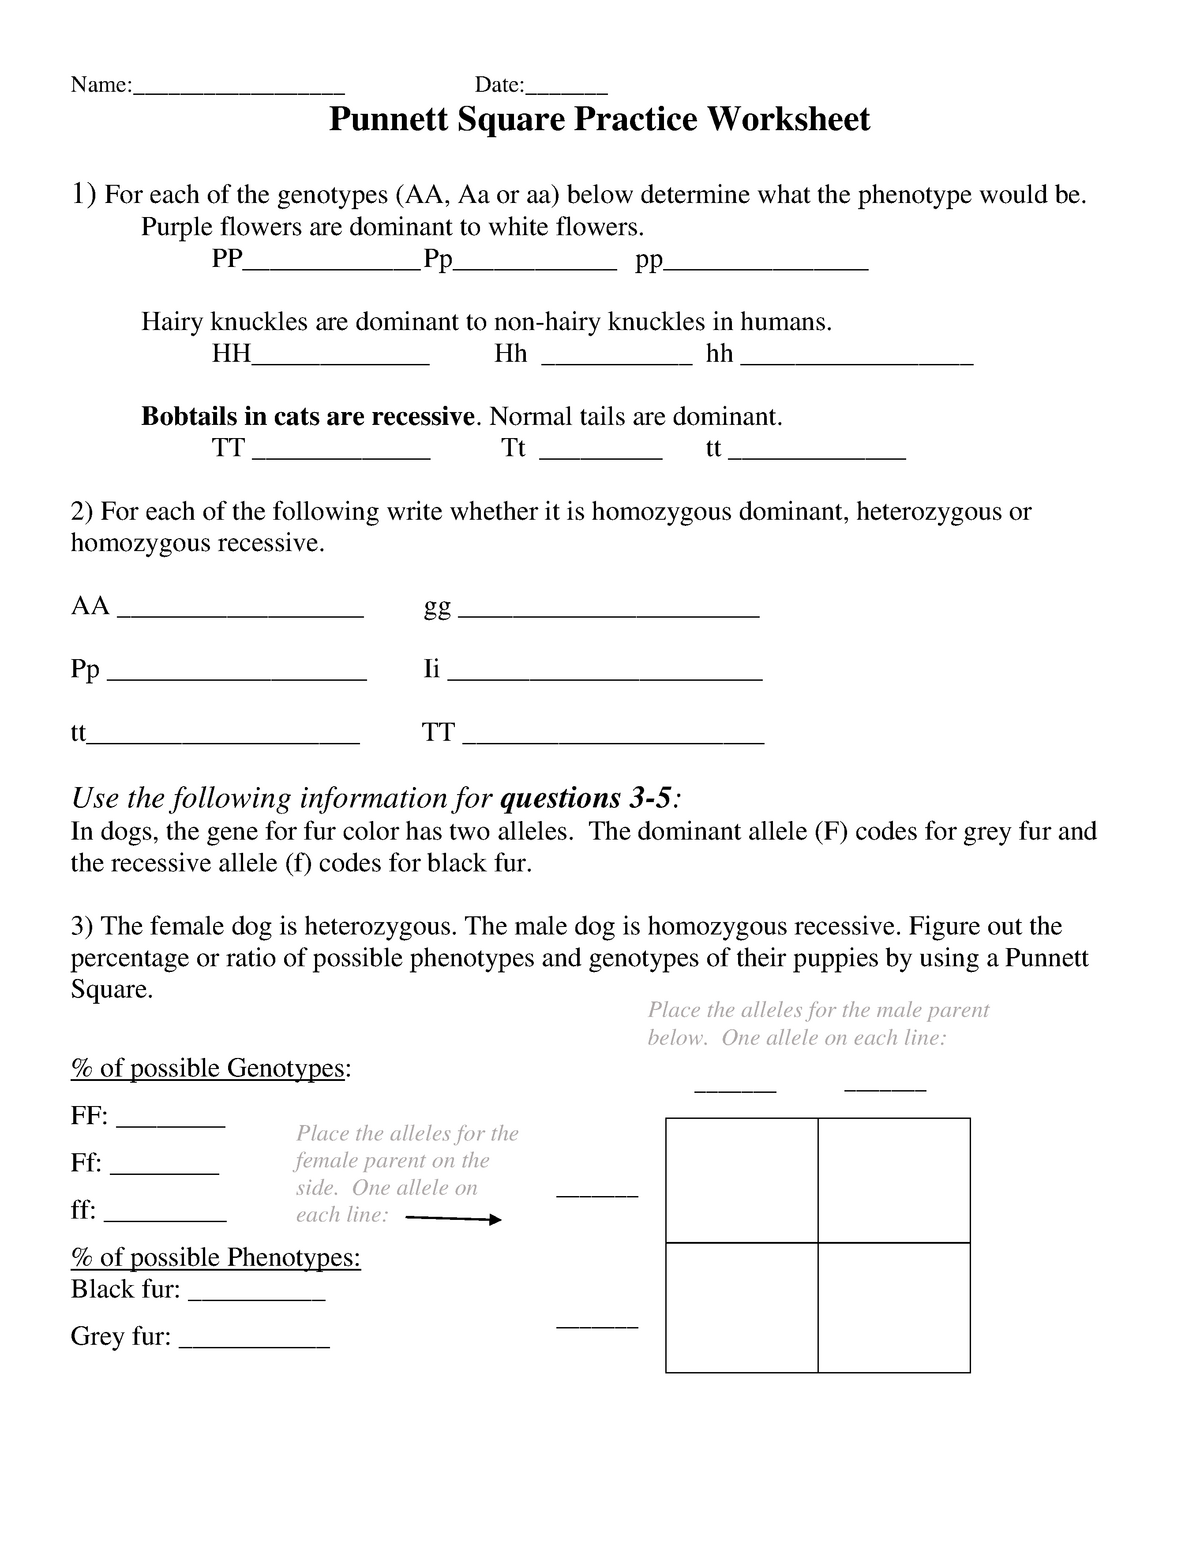 Punnett Square Practice Worksheet (Edited) - Stat for biology Pertaining To Genotypes And Phenotypes Worksheet Answers